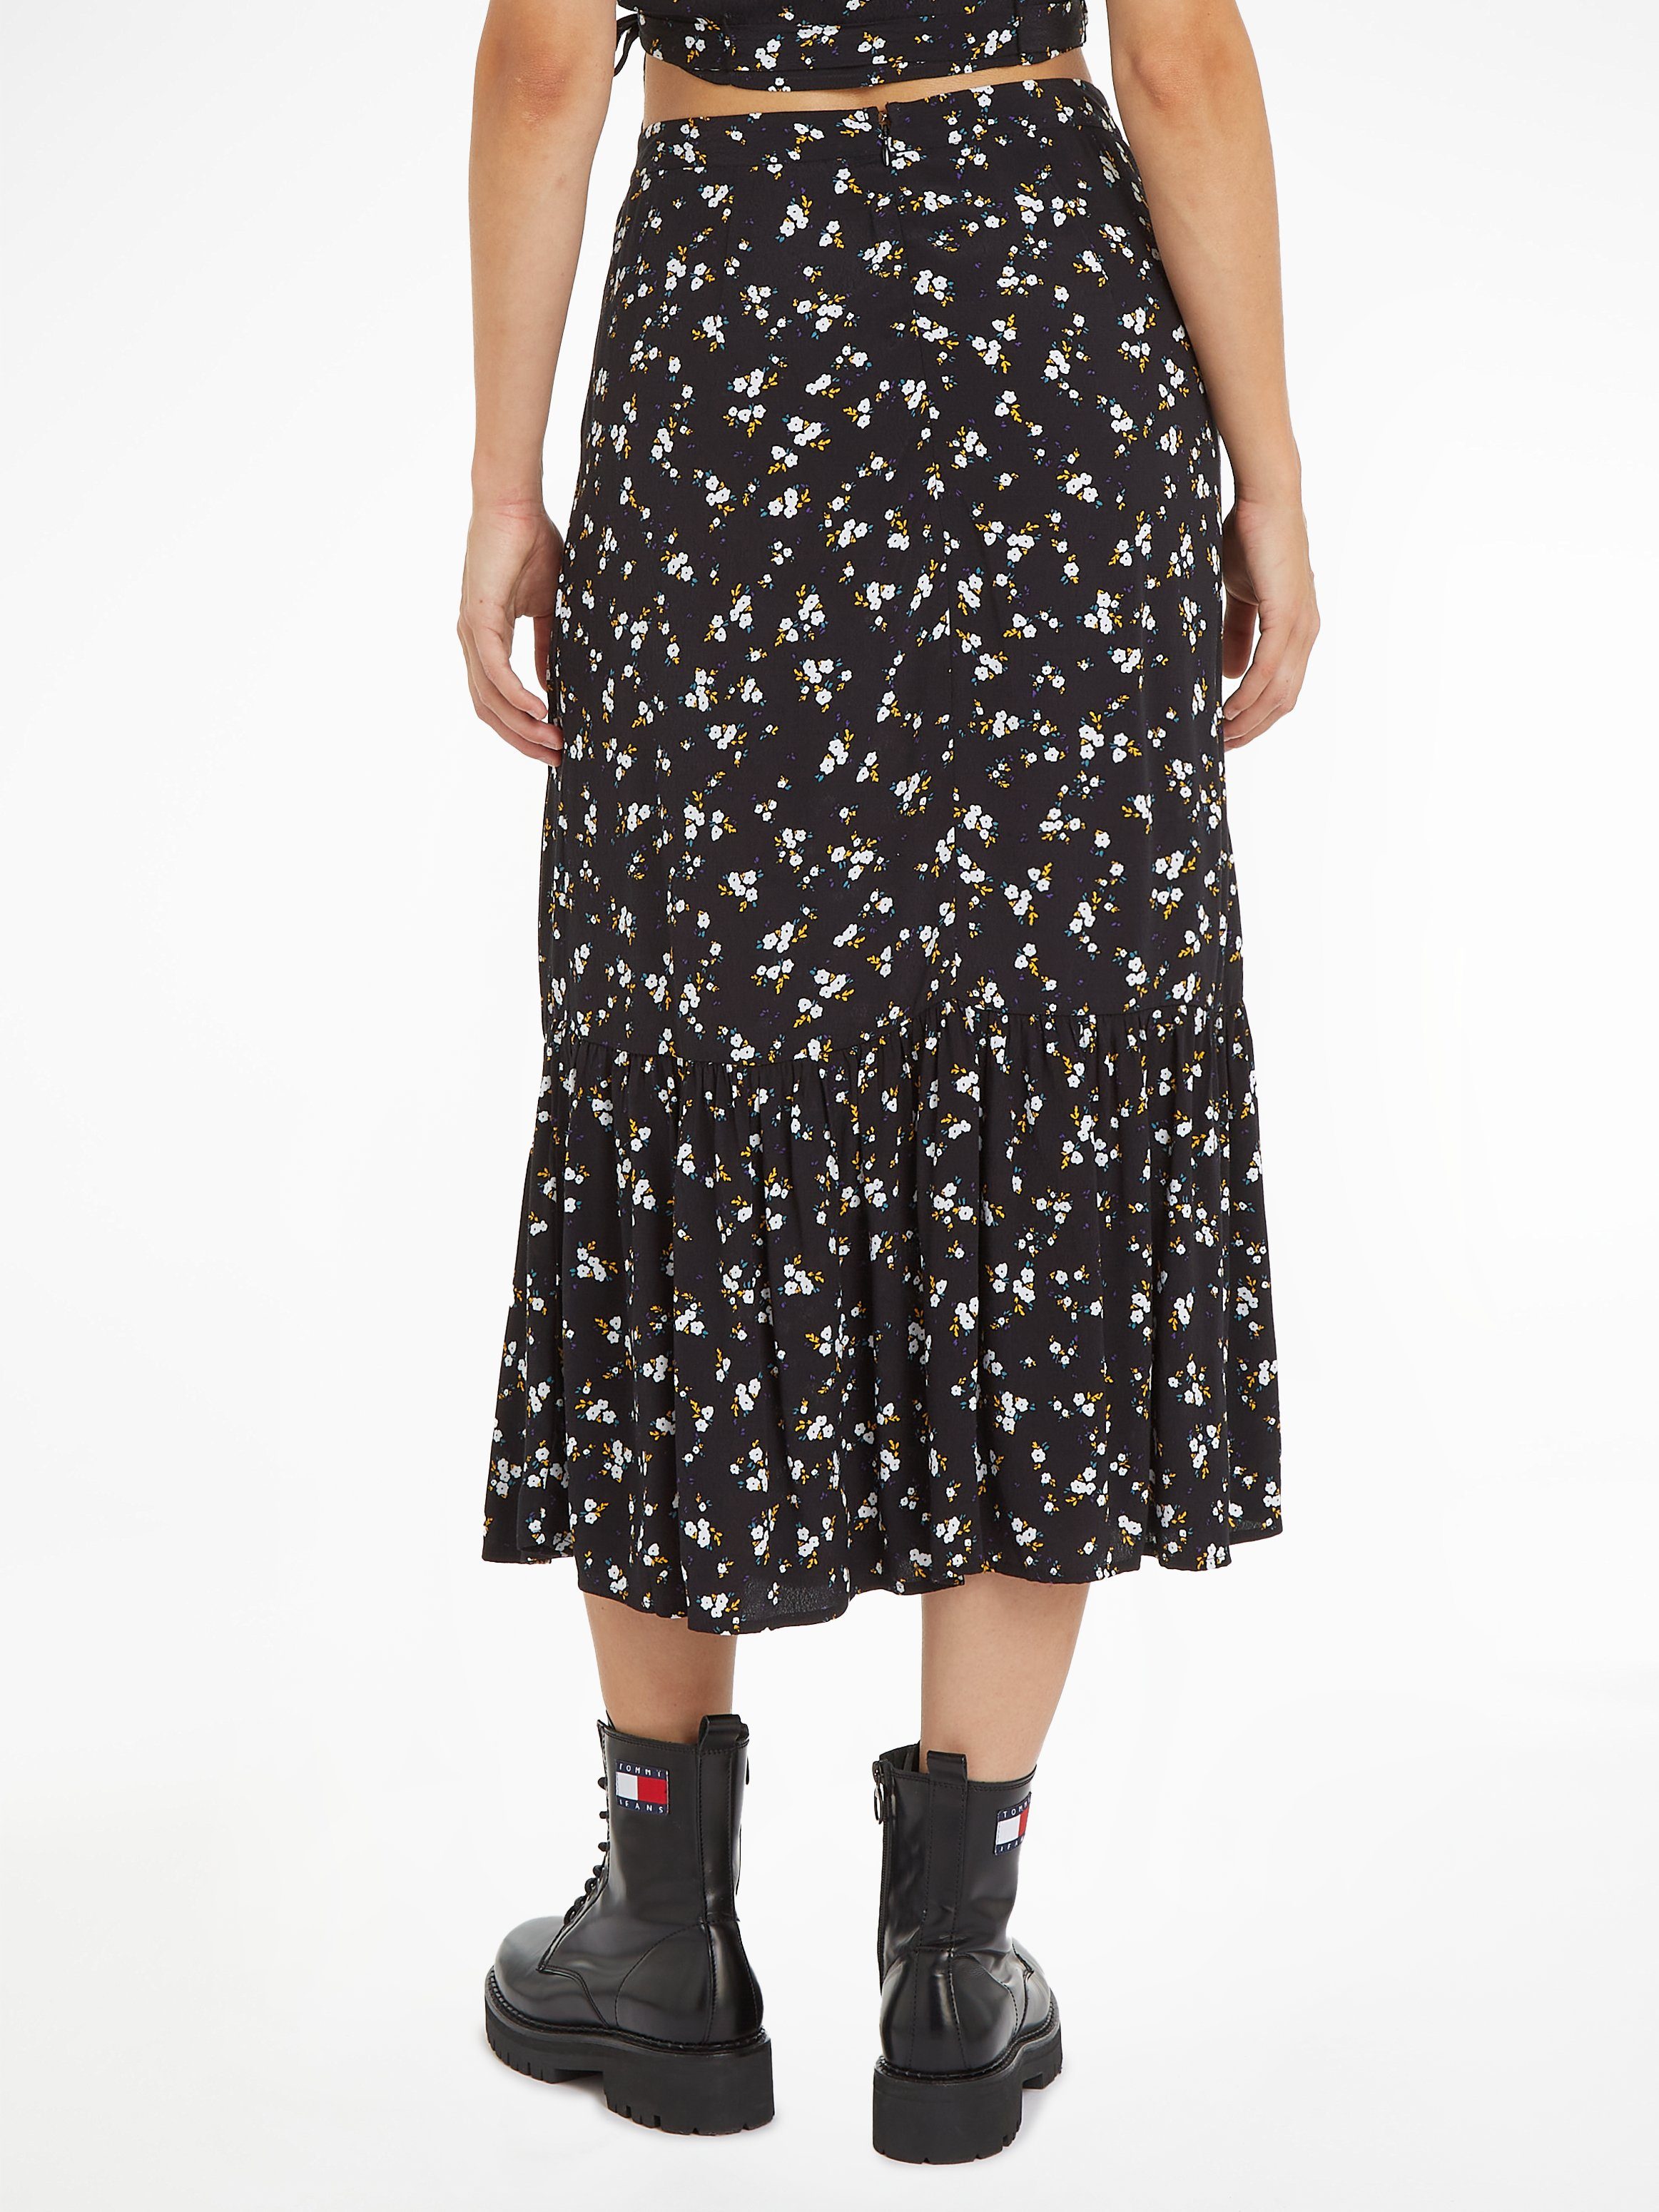 SKIRT MIDI Tommy Mit Jeans Markenlabel A-Linien-Rock EXT Tommy RUFFLE FLORAL TJW Jeans